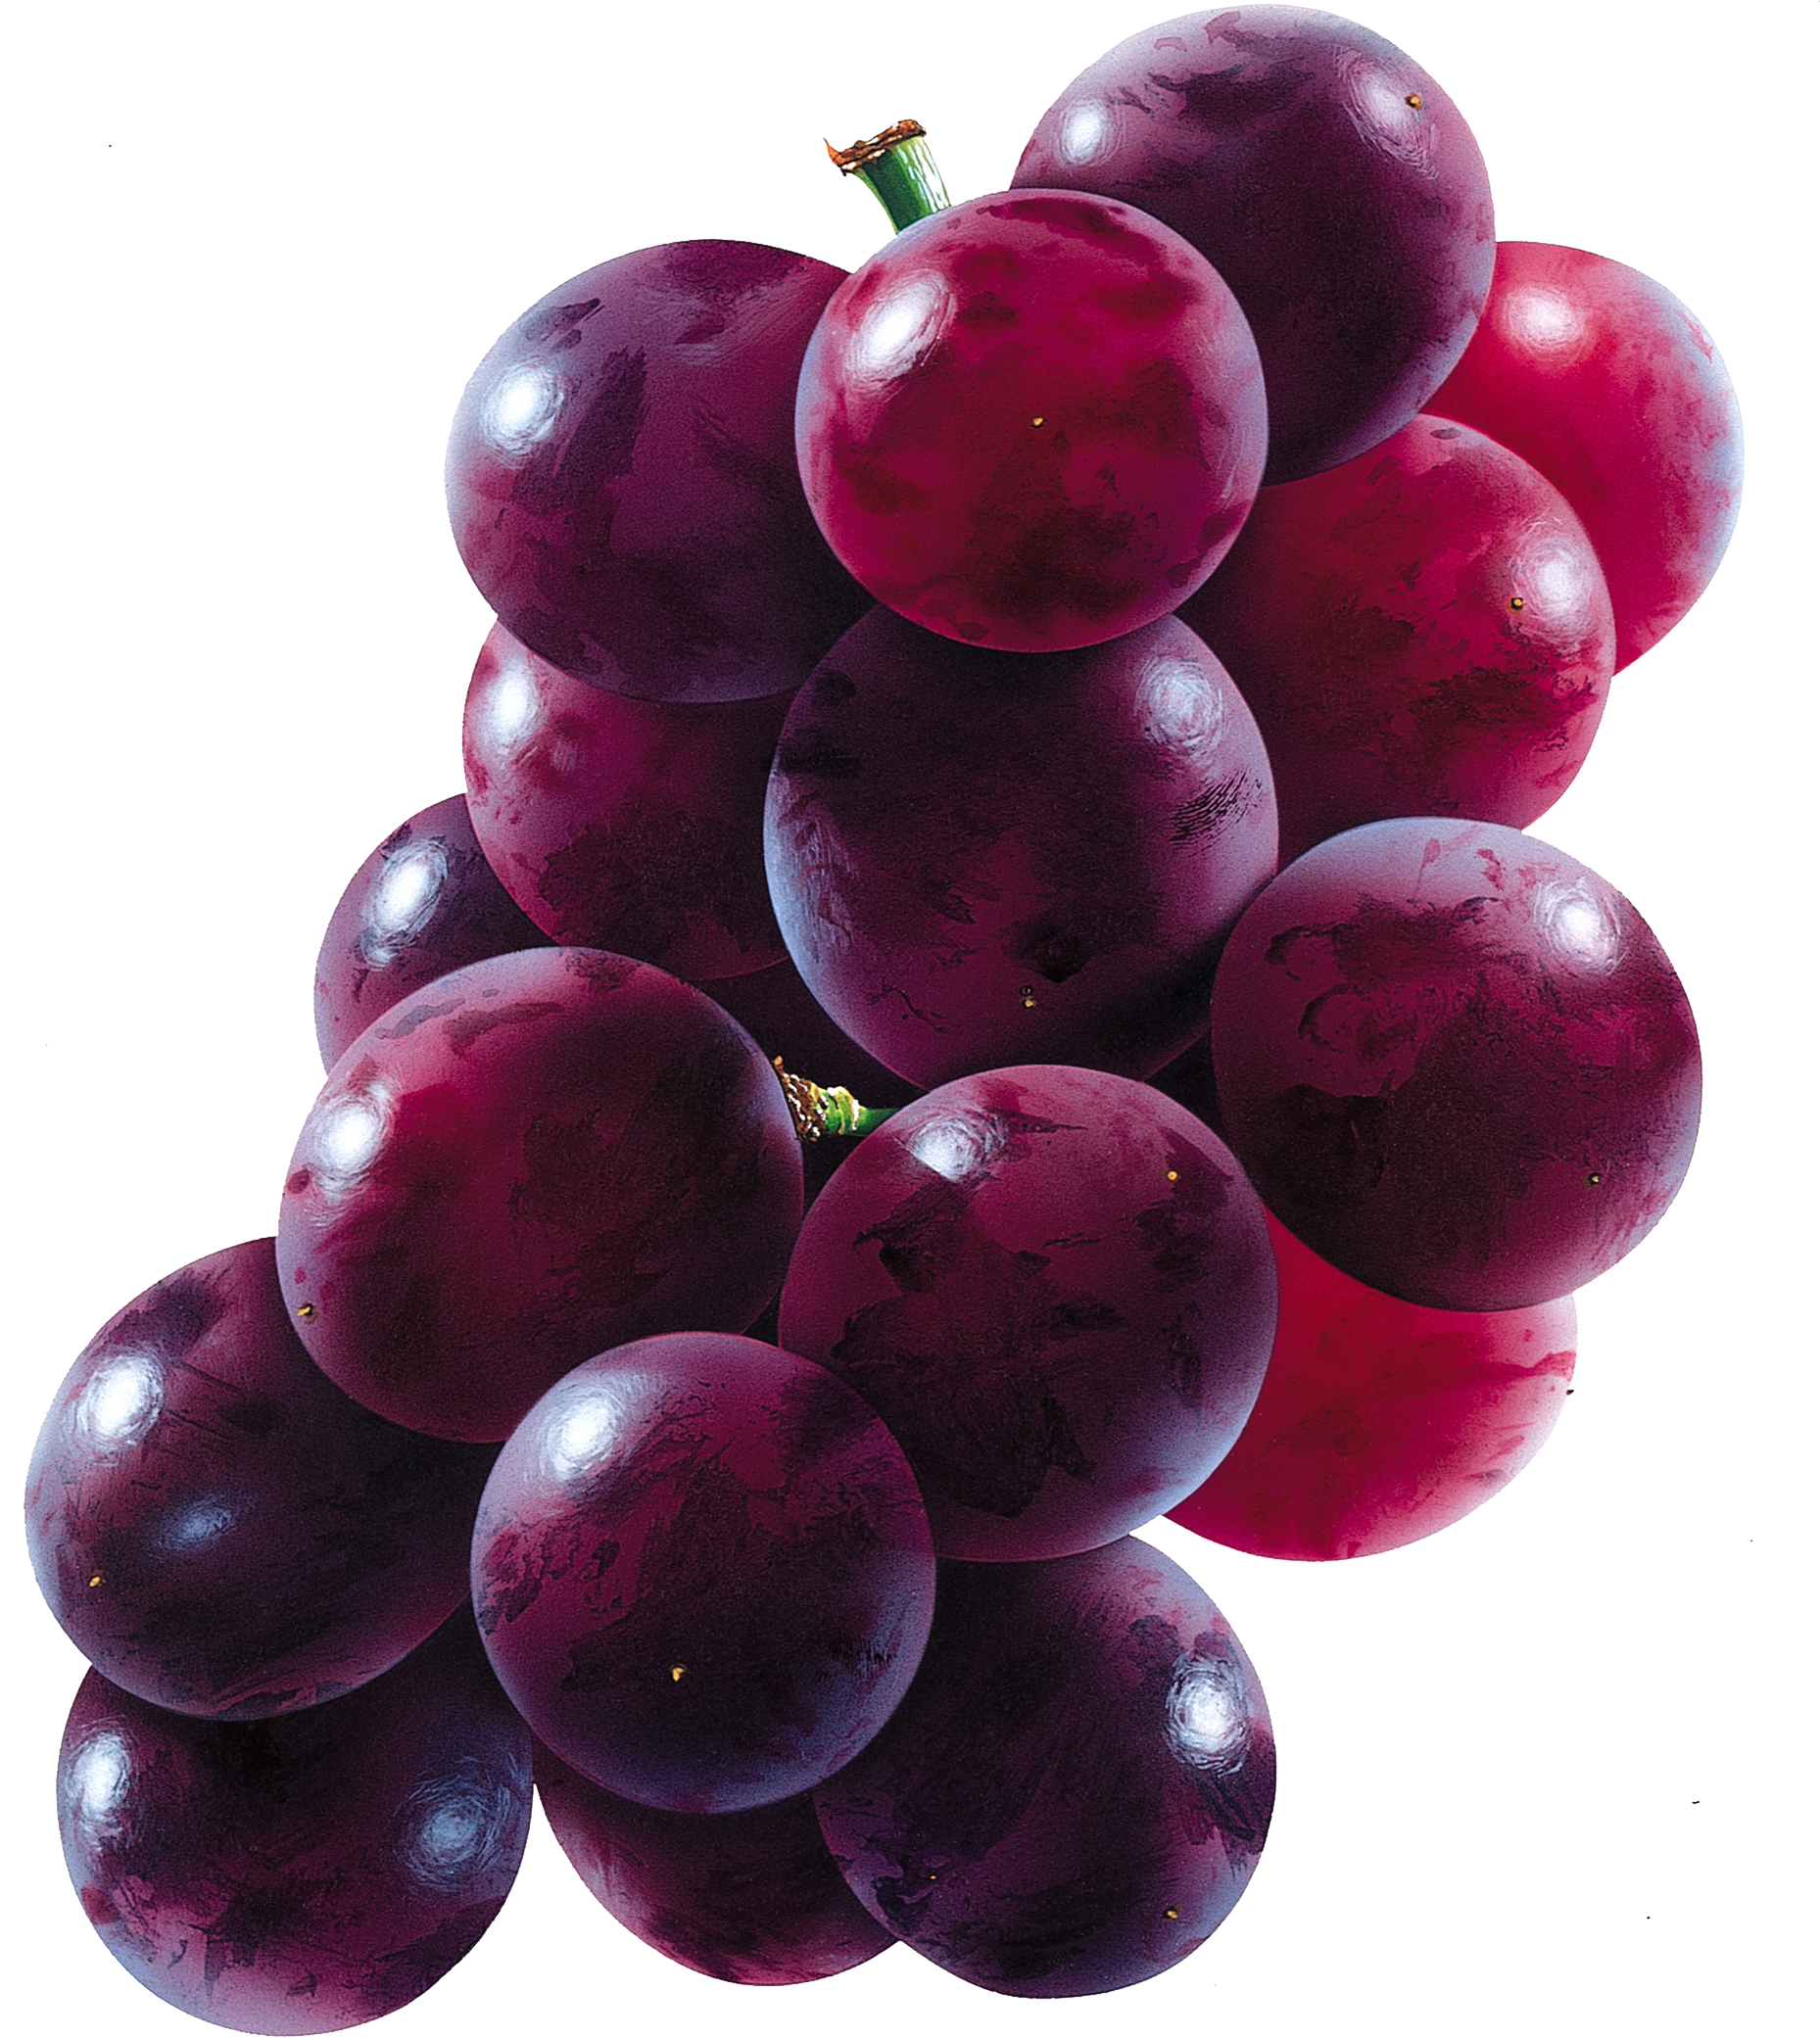 Grape PNG image download, fre